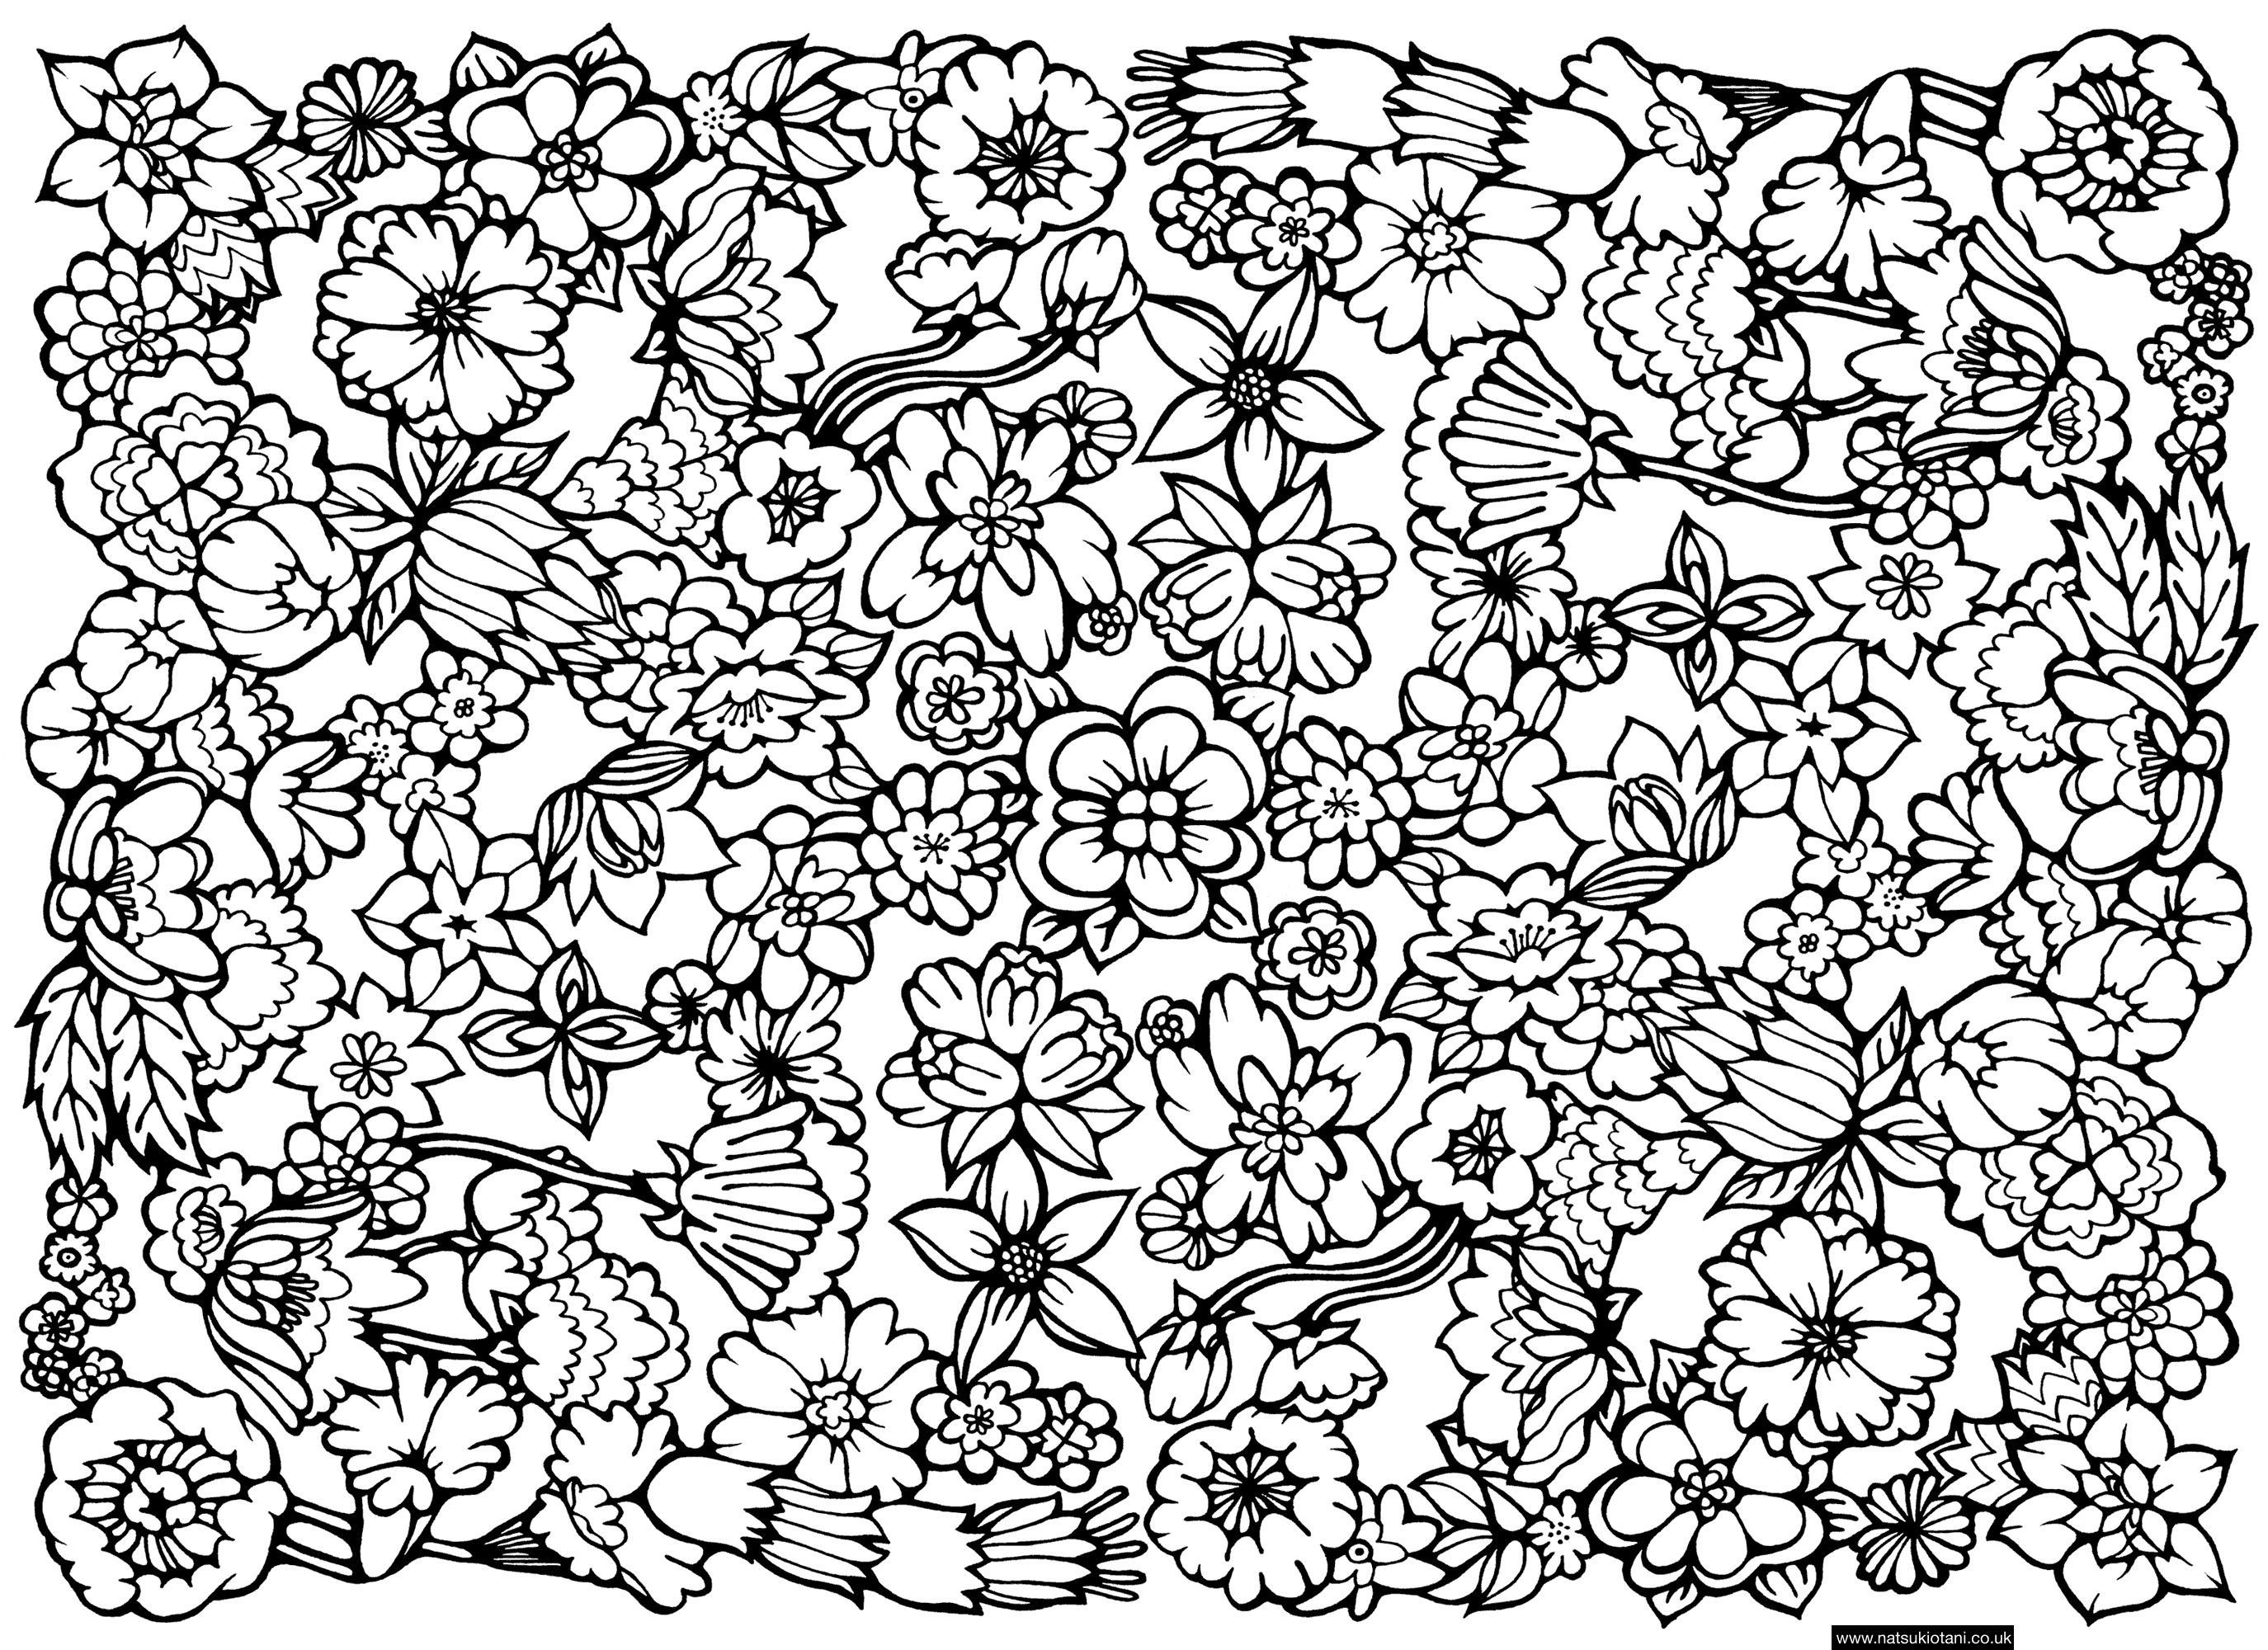 Coloring Pages : Hardng Pages Photo Inspirations For Adults ...